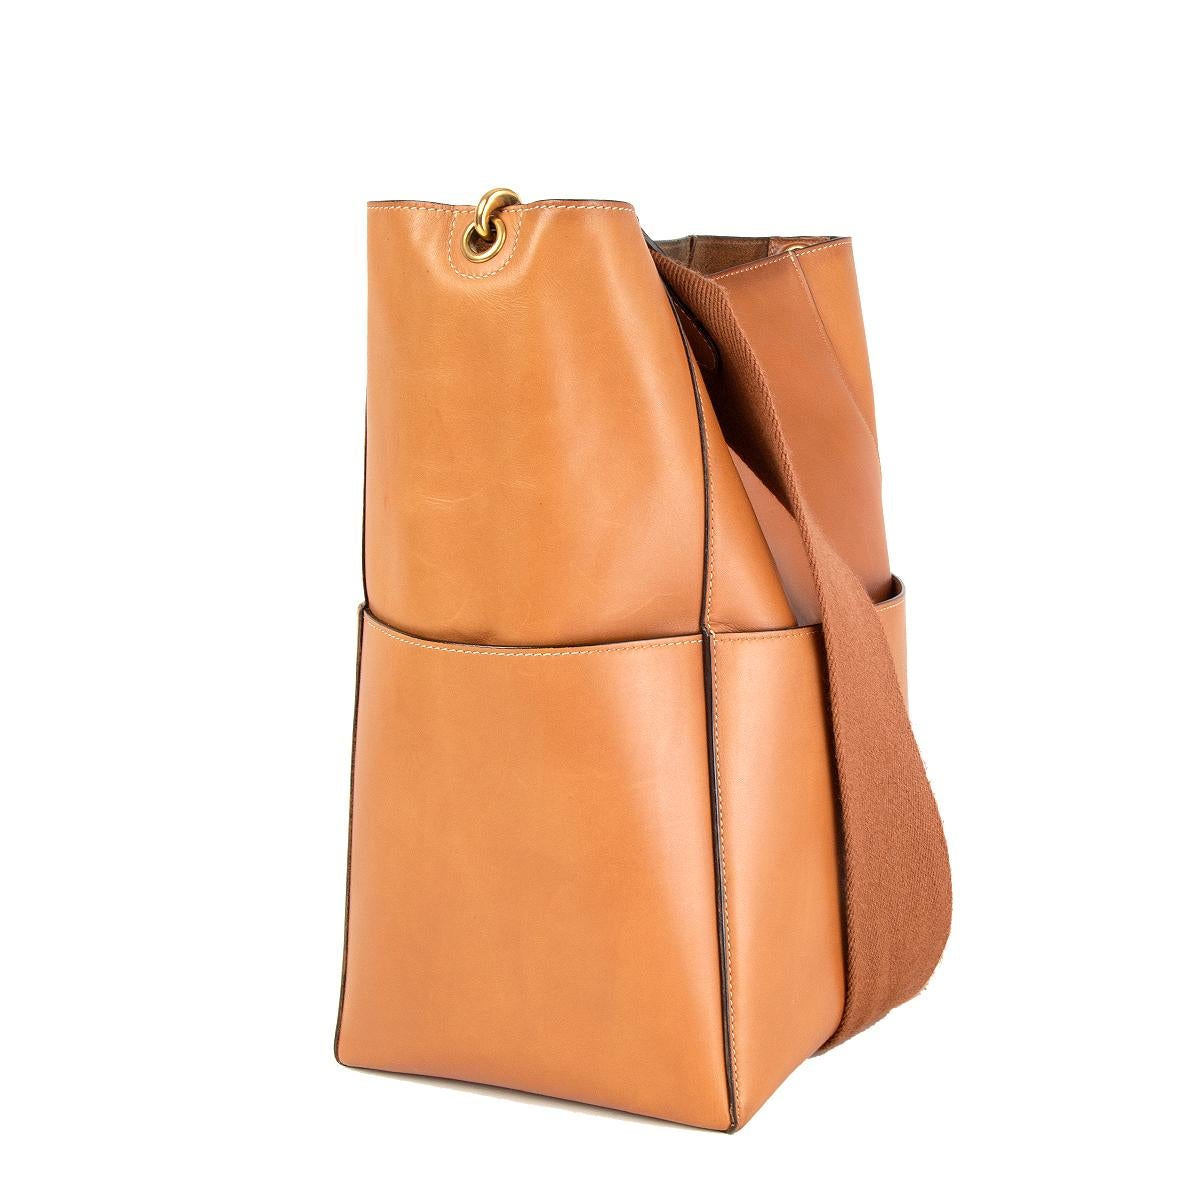 Céline 'Sangle Bucket' shoulder bag in tan natural calfskin featuring gold-tone hardware with four flat outside pockets. Opens with a inner hook closure and is unlined with a flat and zipped pocket against the back. Removable wool shoulder strap.